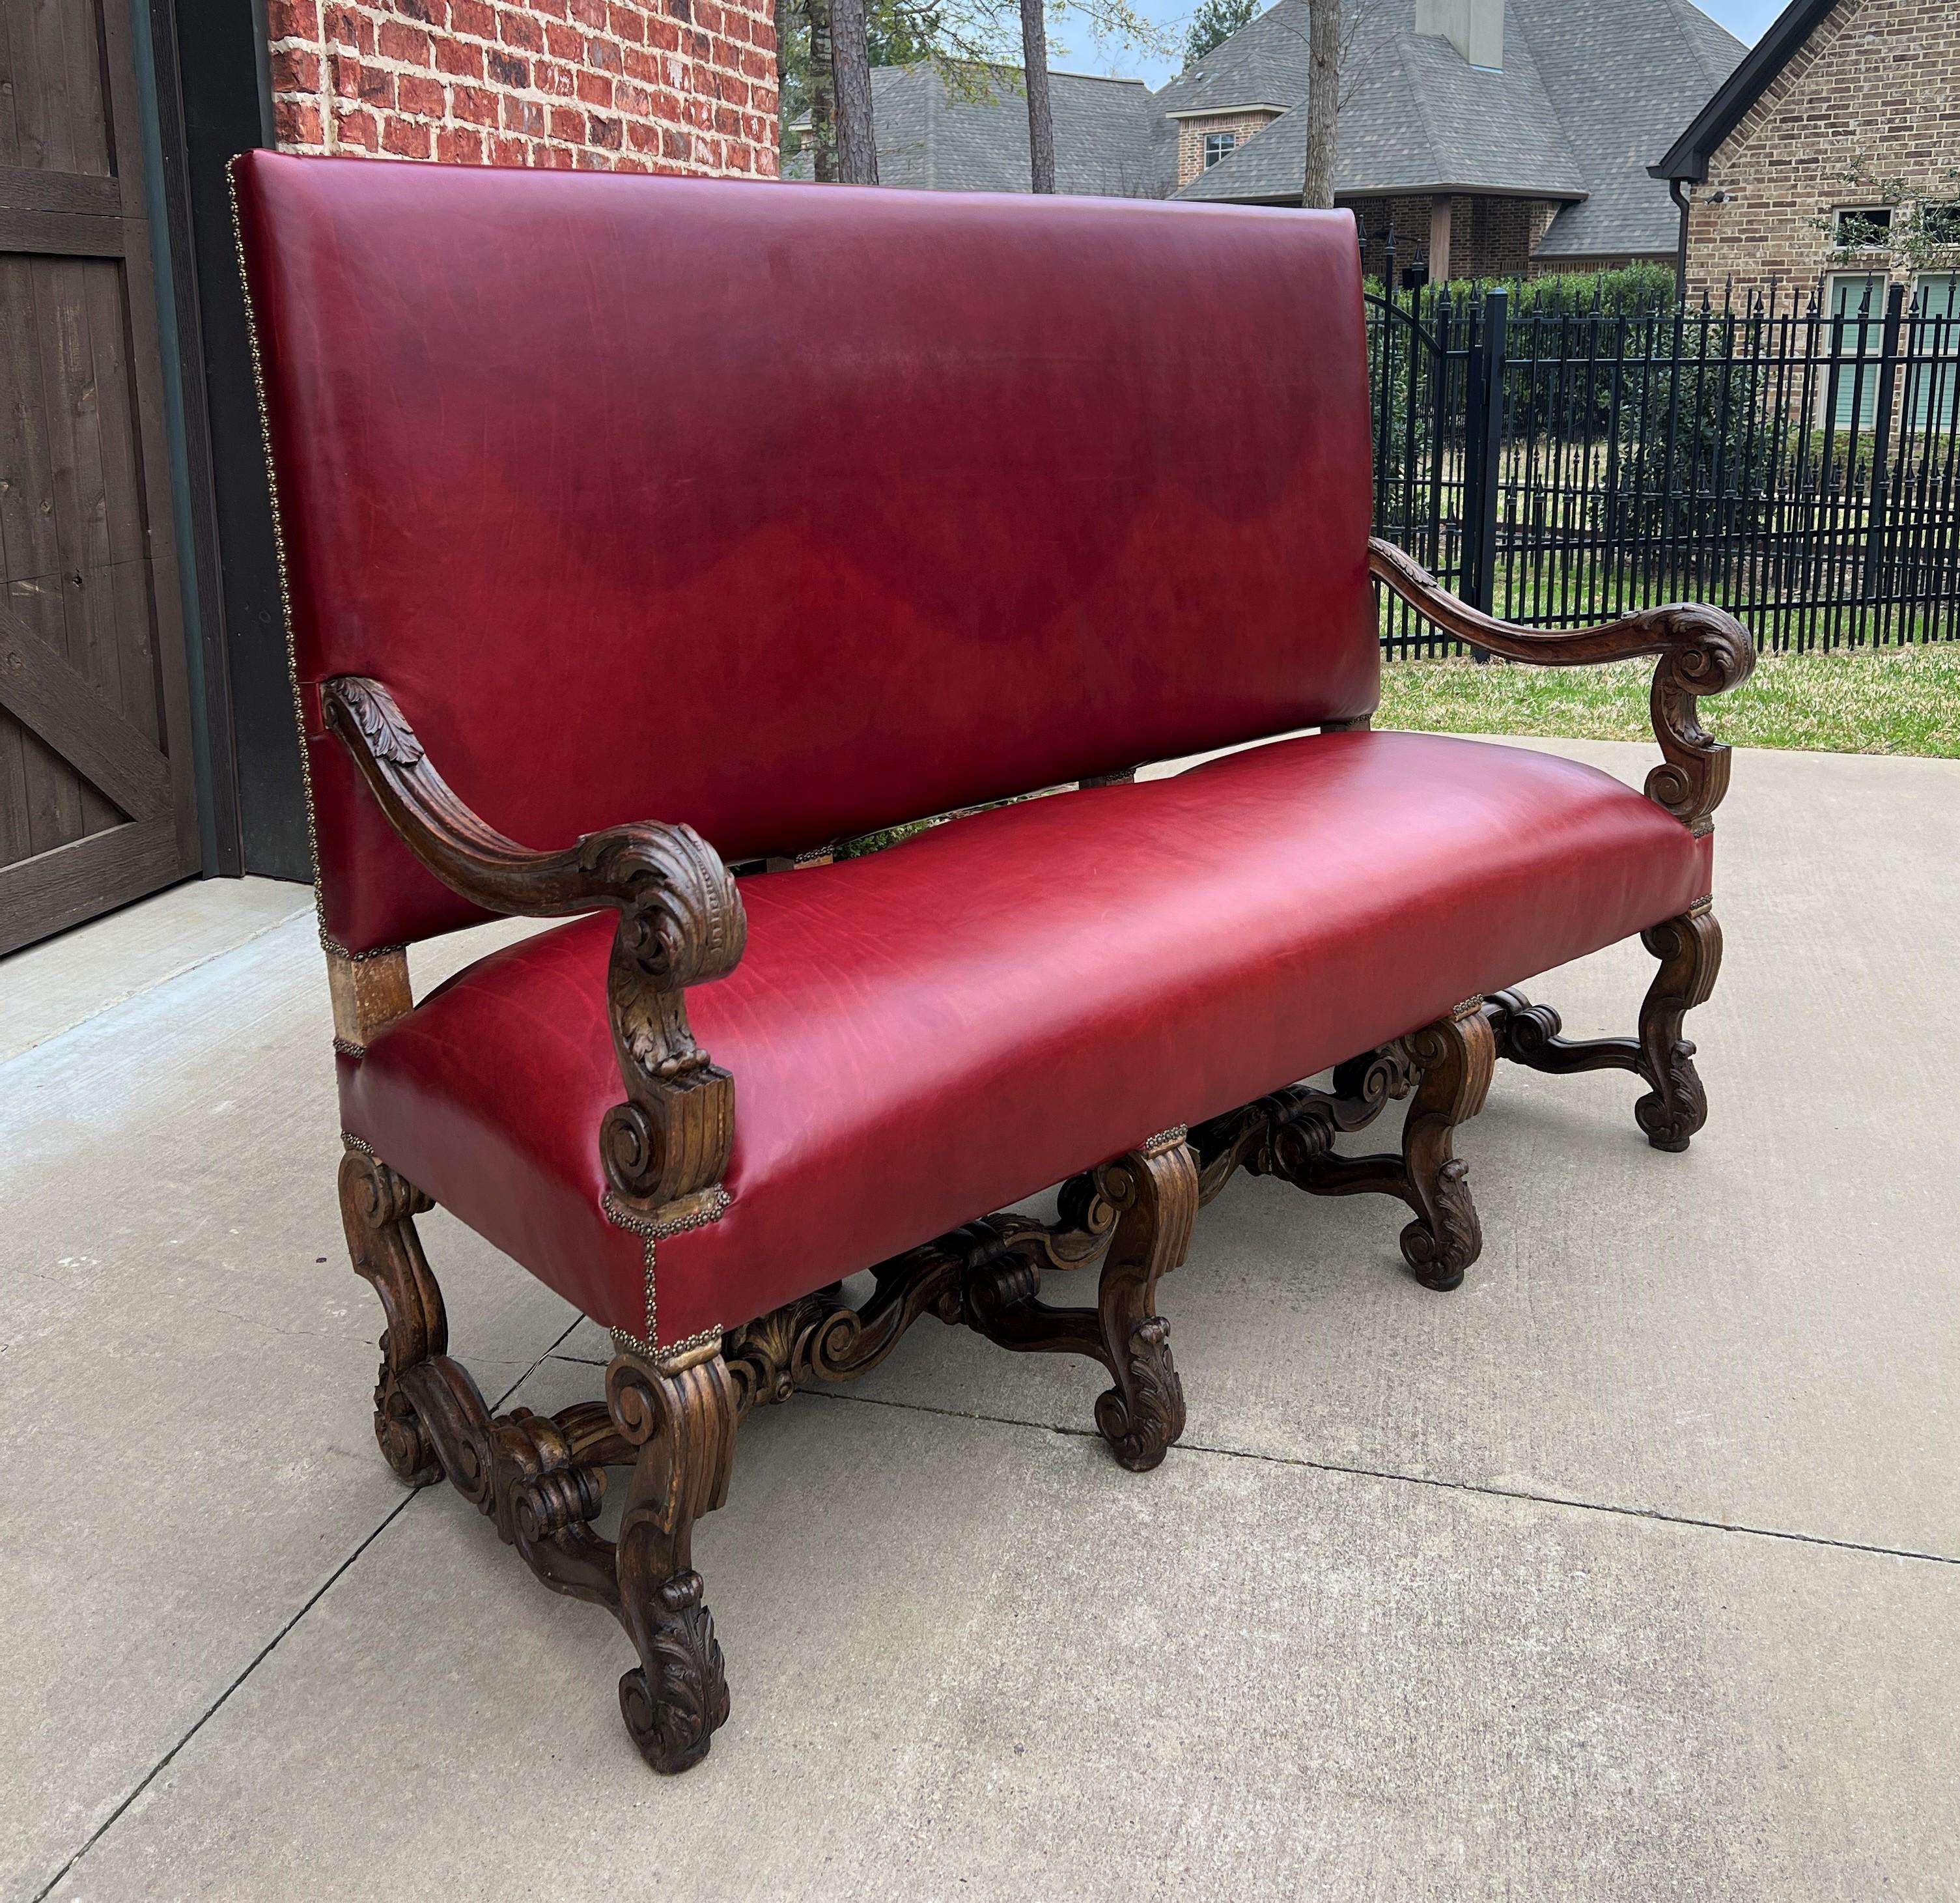 Charming antique carved oak frame paired with red upholstered hall bench, settee, sofa, or loveseat.
Perfect rustic, ranch or western look for a farmhouse, hunting or mountain cabinet, ski lodge, office, study or library~~the possibilities are